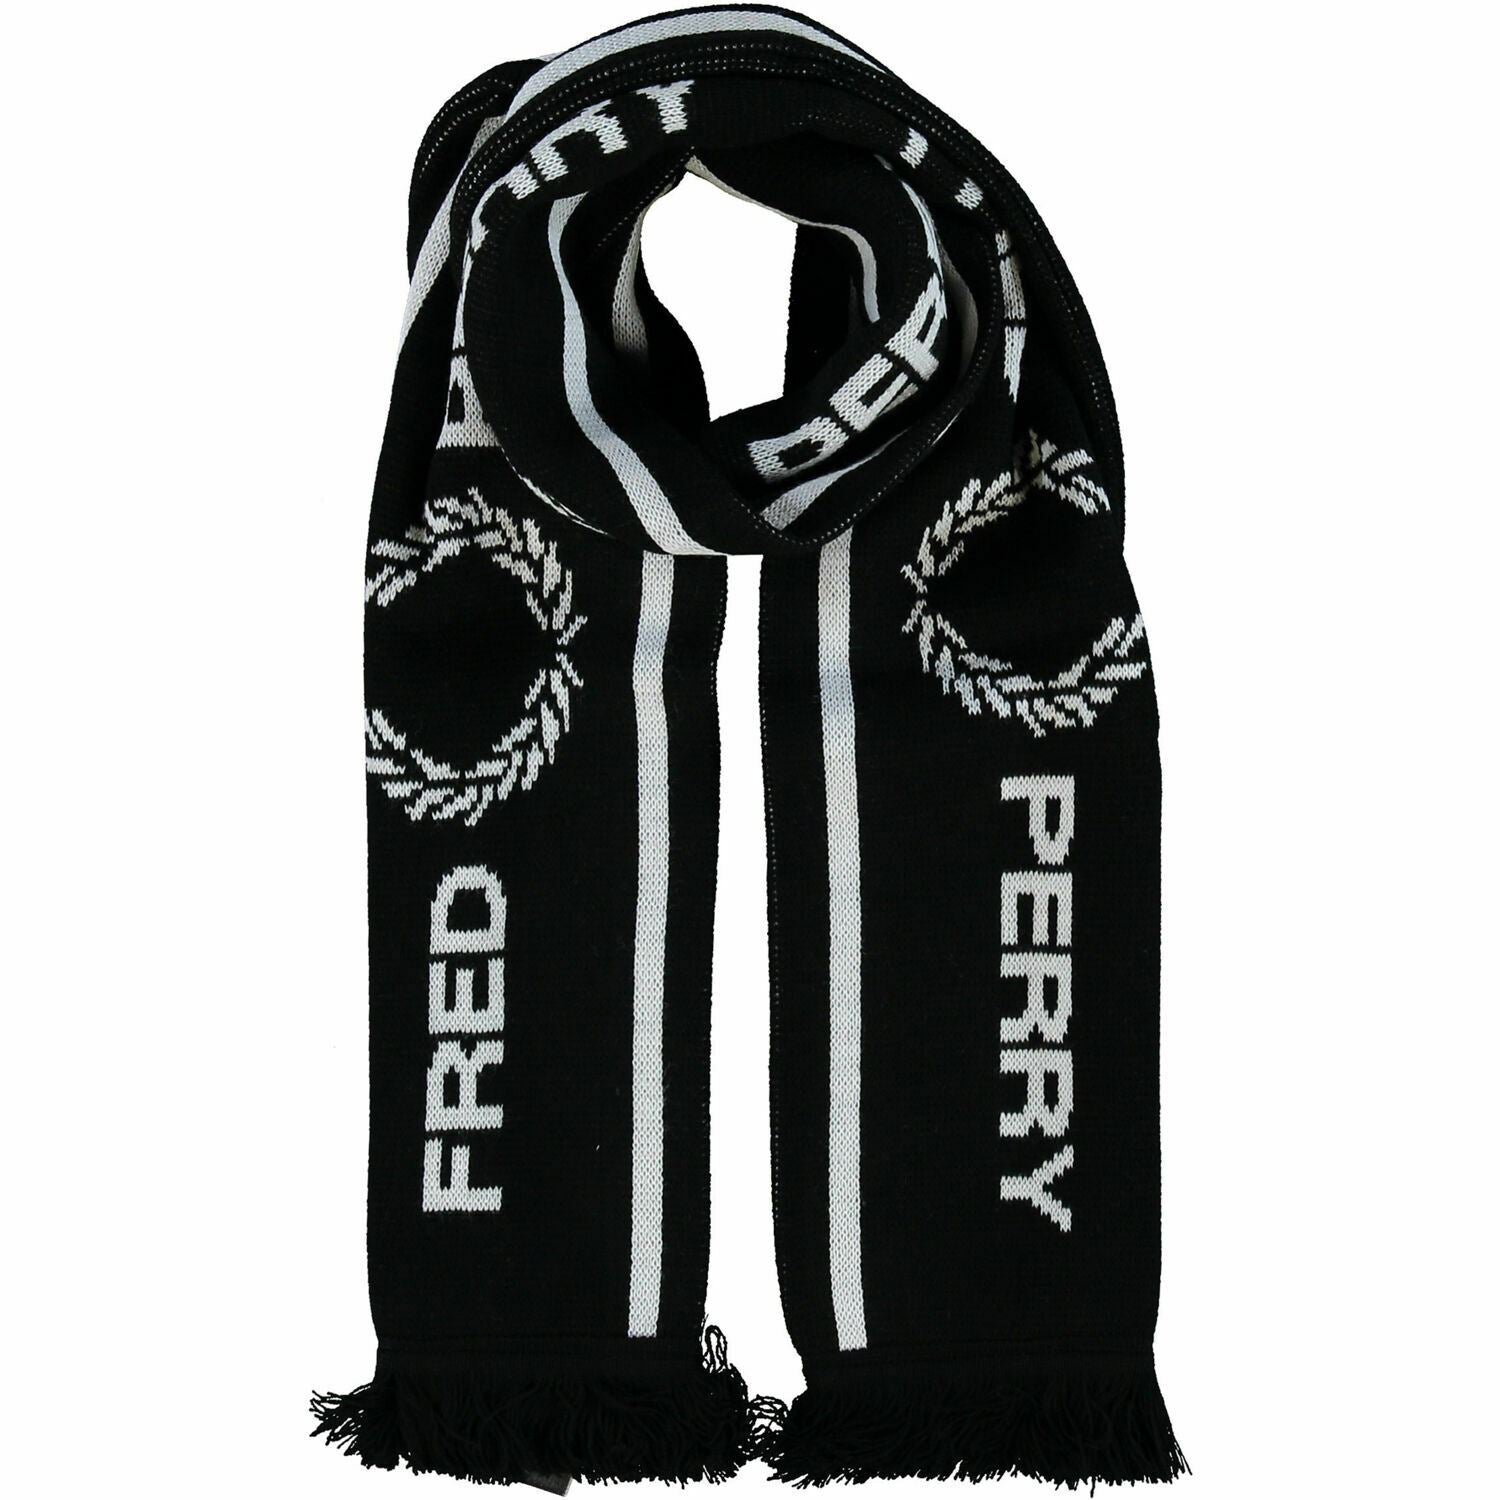 FRED PERRY Men's Black/White Knitted Scarf, made in England